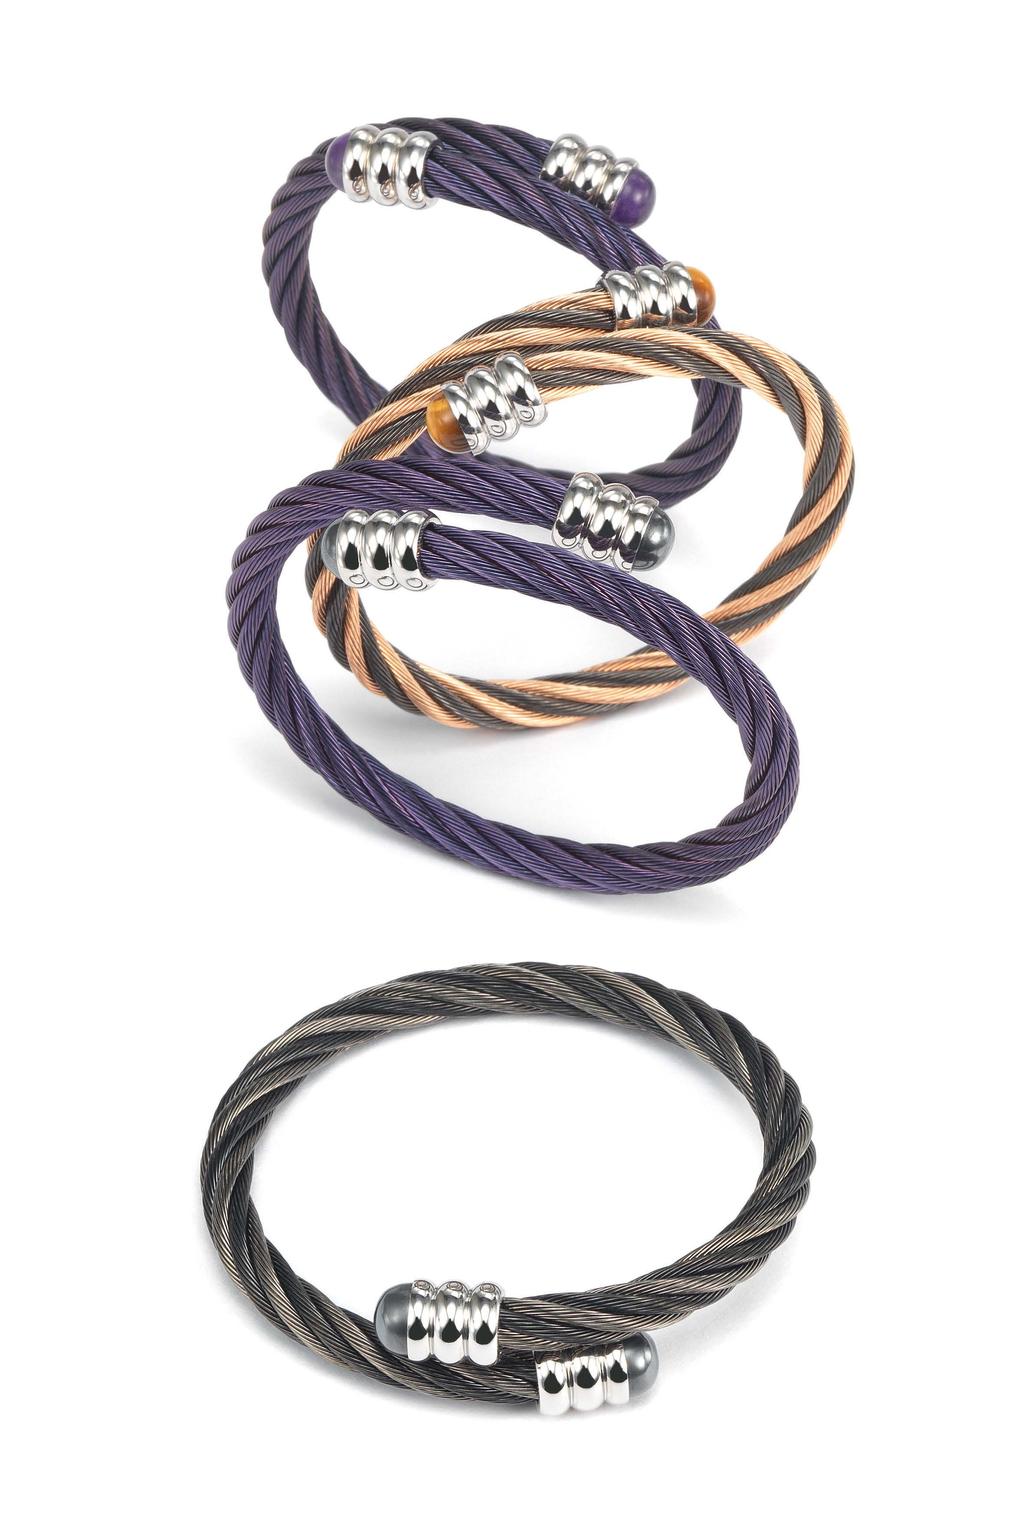 CELTIC Technical Datas CELTIC Material Steel, stainless steel cables, semi-precious stones Set Bangle Finish Prune PVD cable with either prune cabochon amethyst or grey haematite, rose gold and